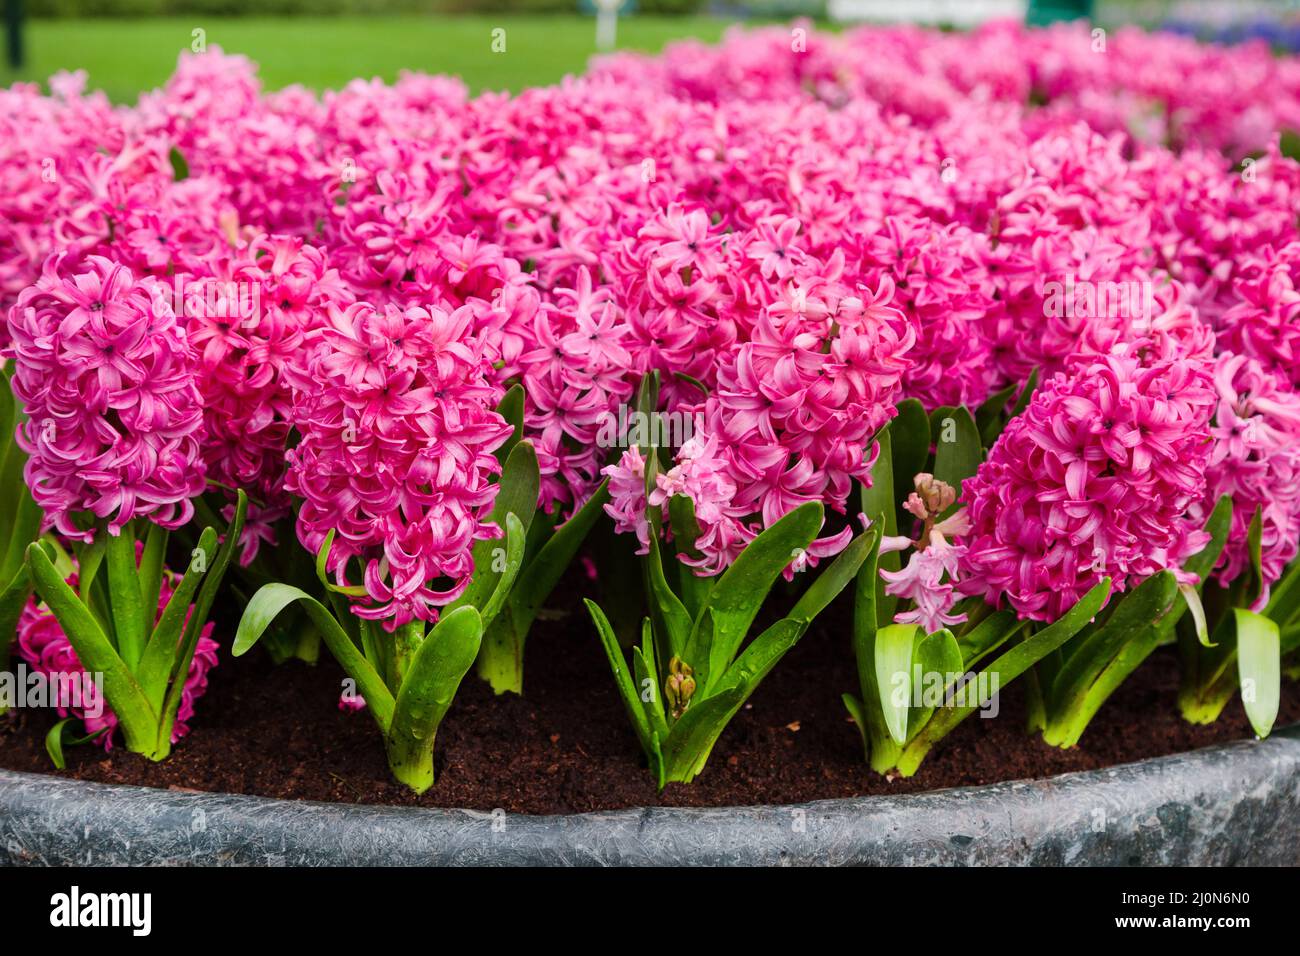 Spring background with vibrant pink Hyacinth flowers growing on the flowerbed in the garden Stock Photo